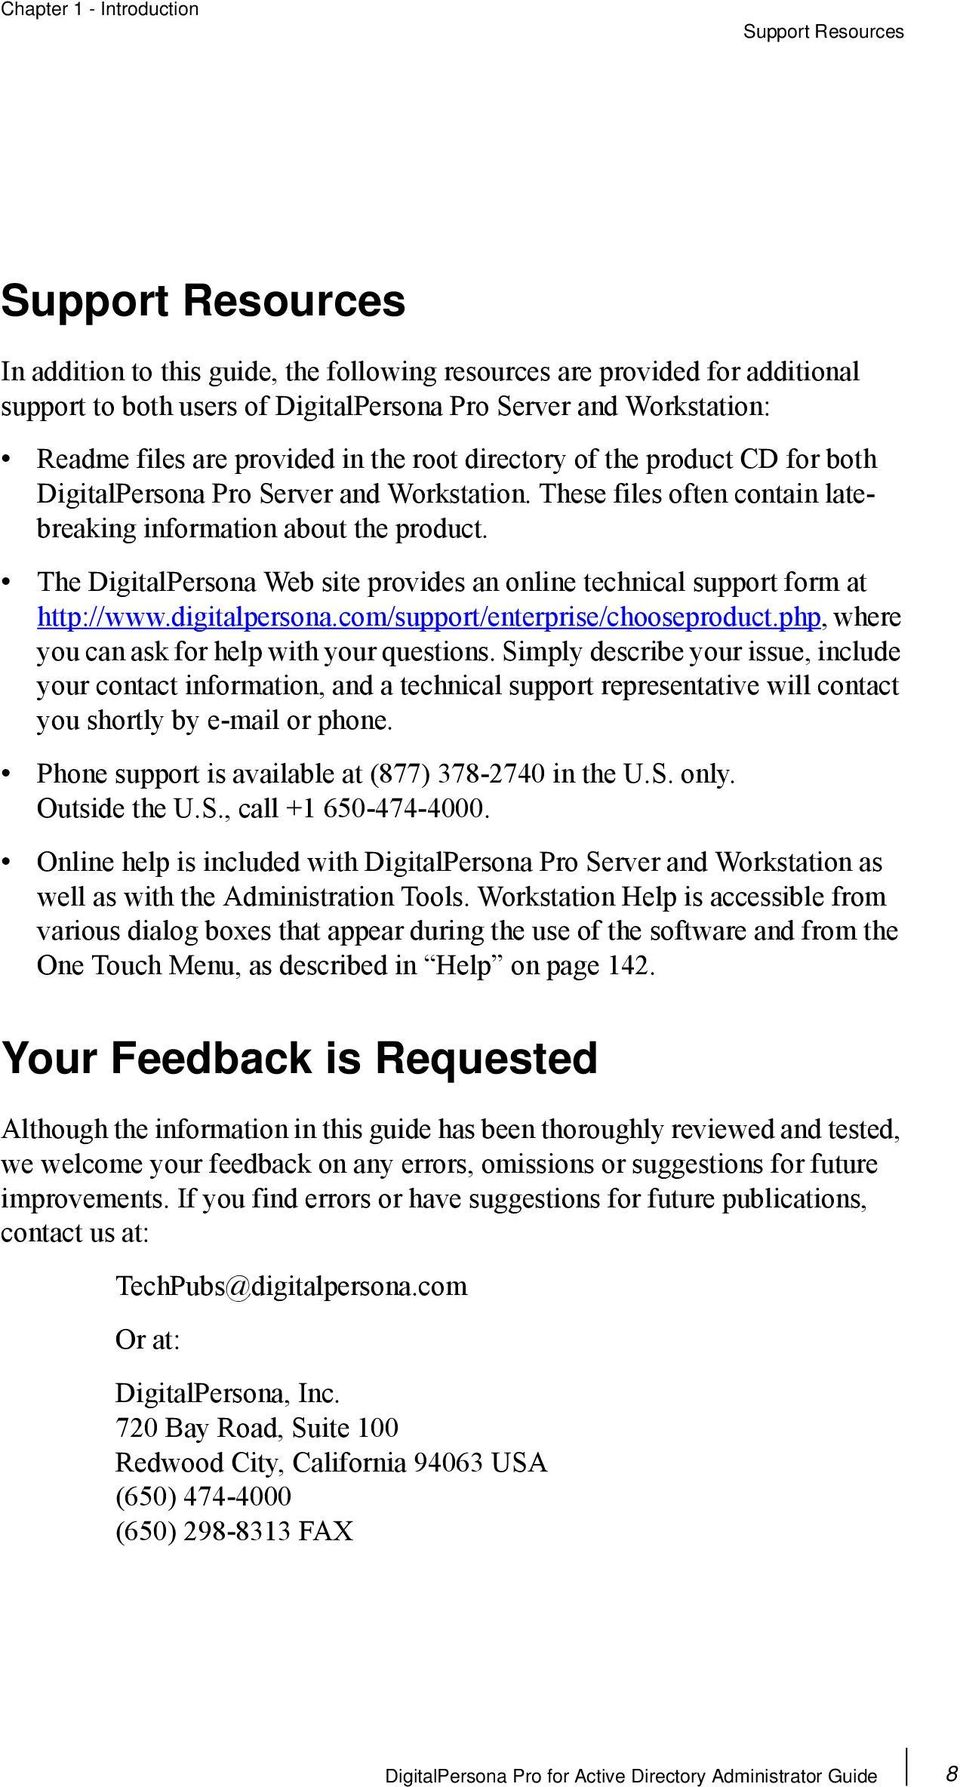 The DigitalPersona Web site provides an online technical support form at http://www.digitalpersona.com/support/enterprise/chooseproduct.php, where you can ask for help with your questions.